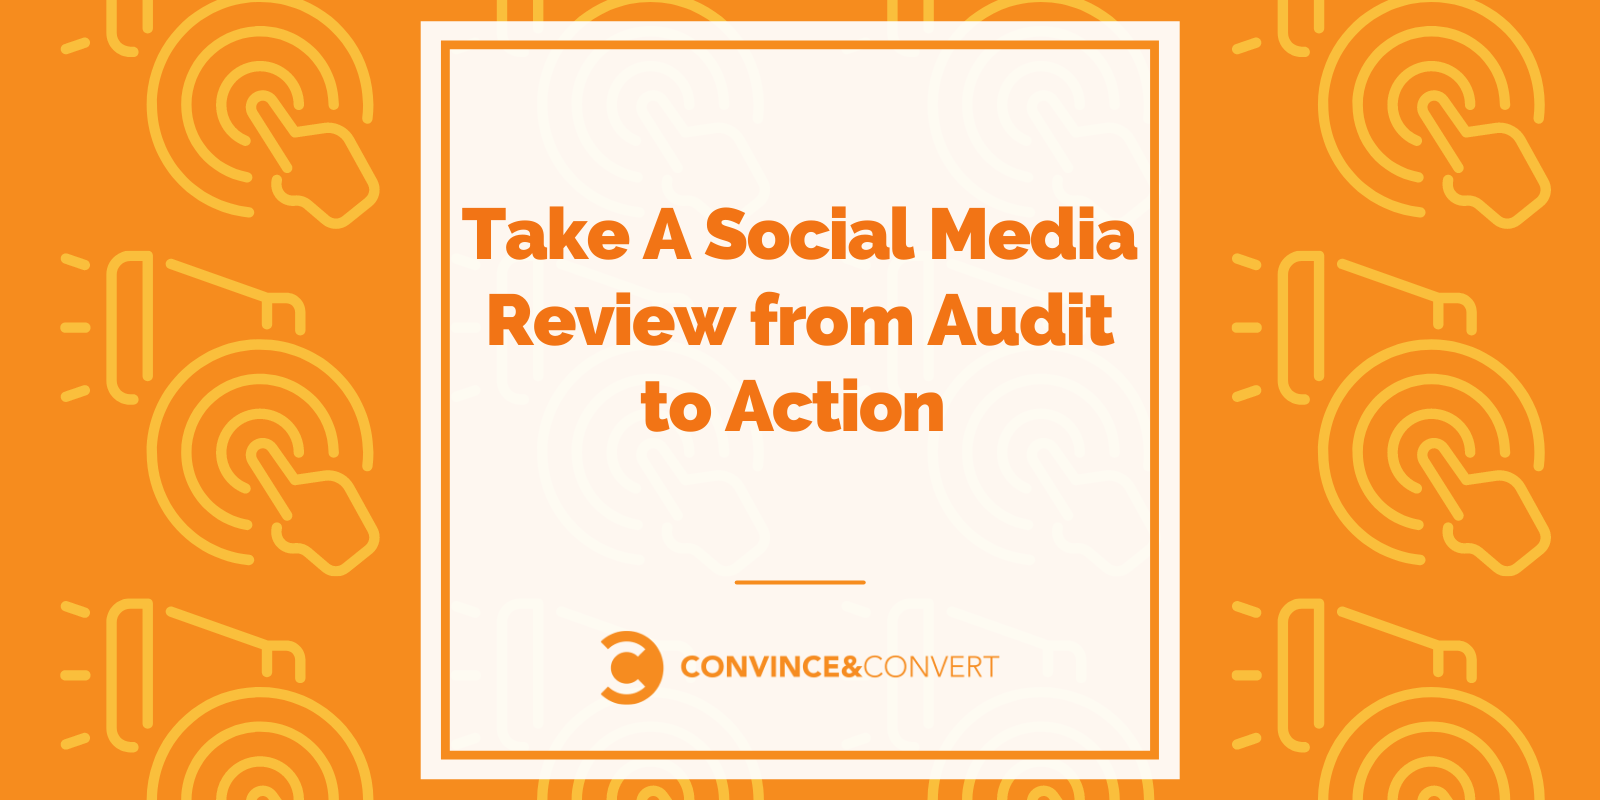 Rob A Social Media Evaluation from Audit to Action